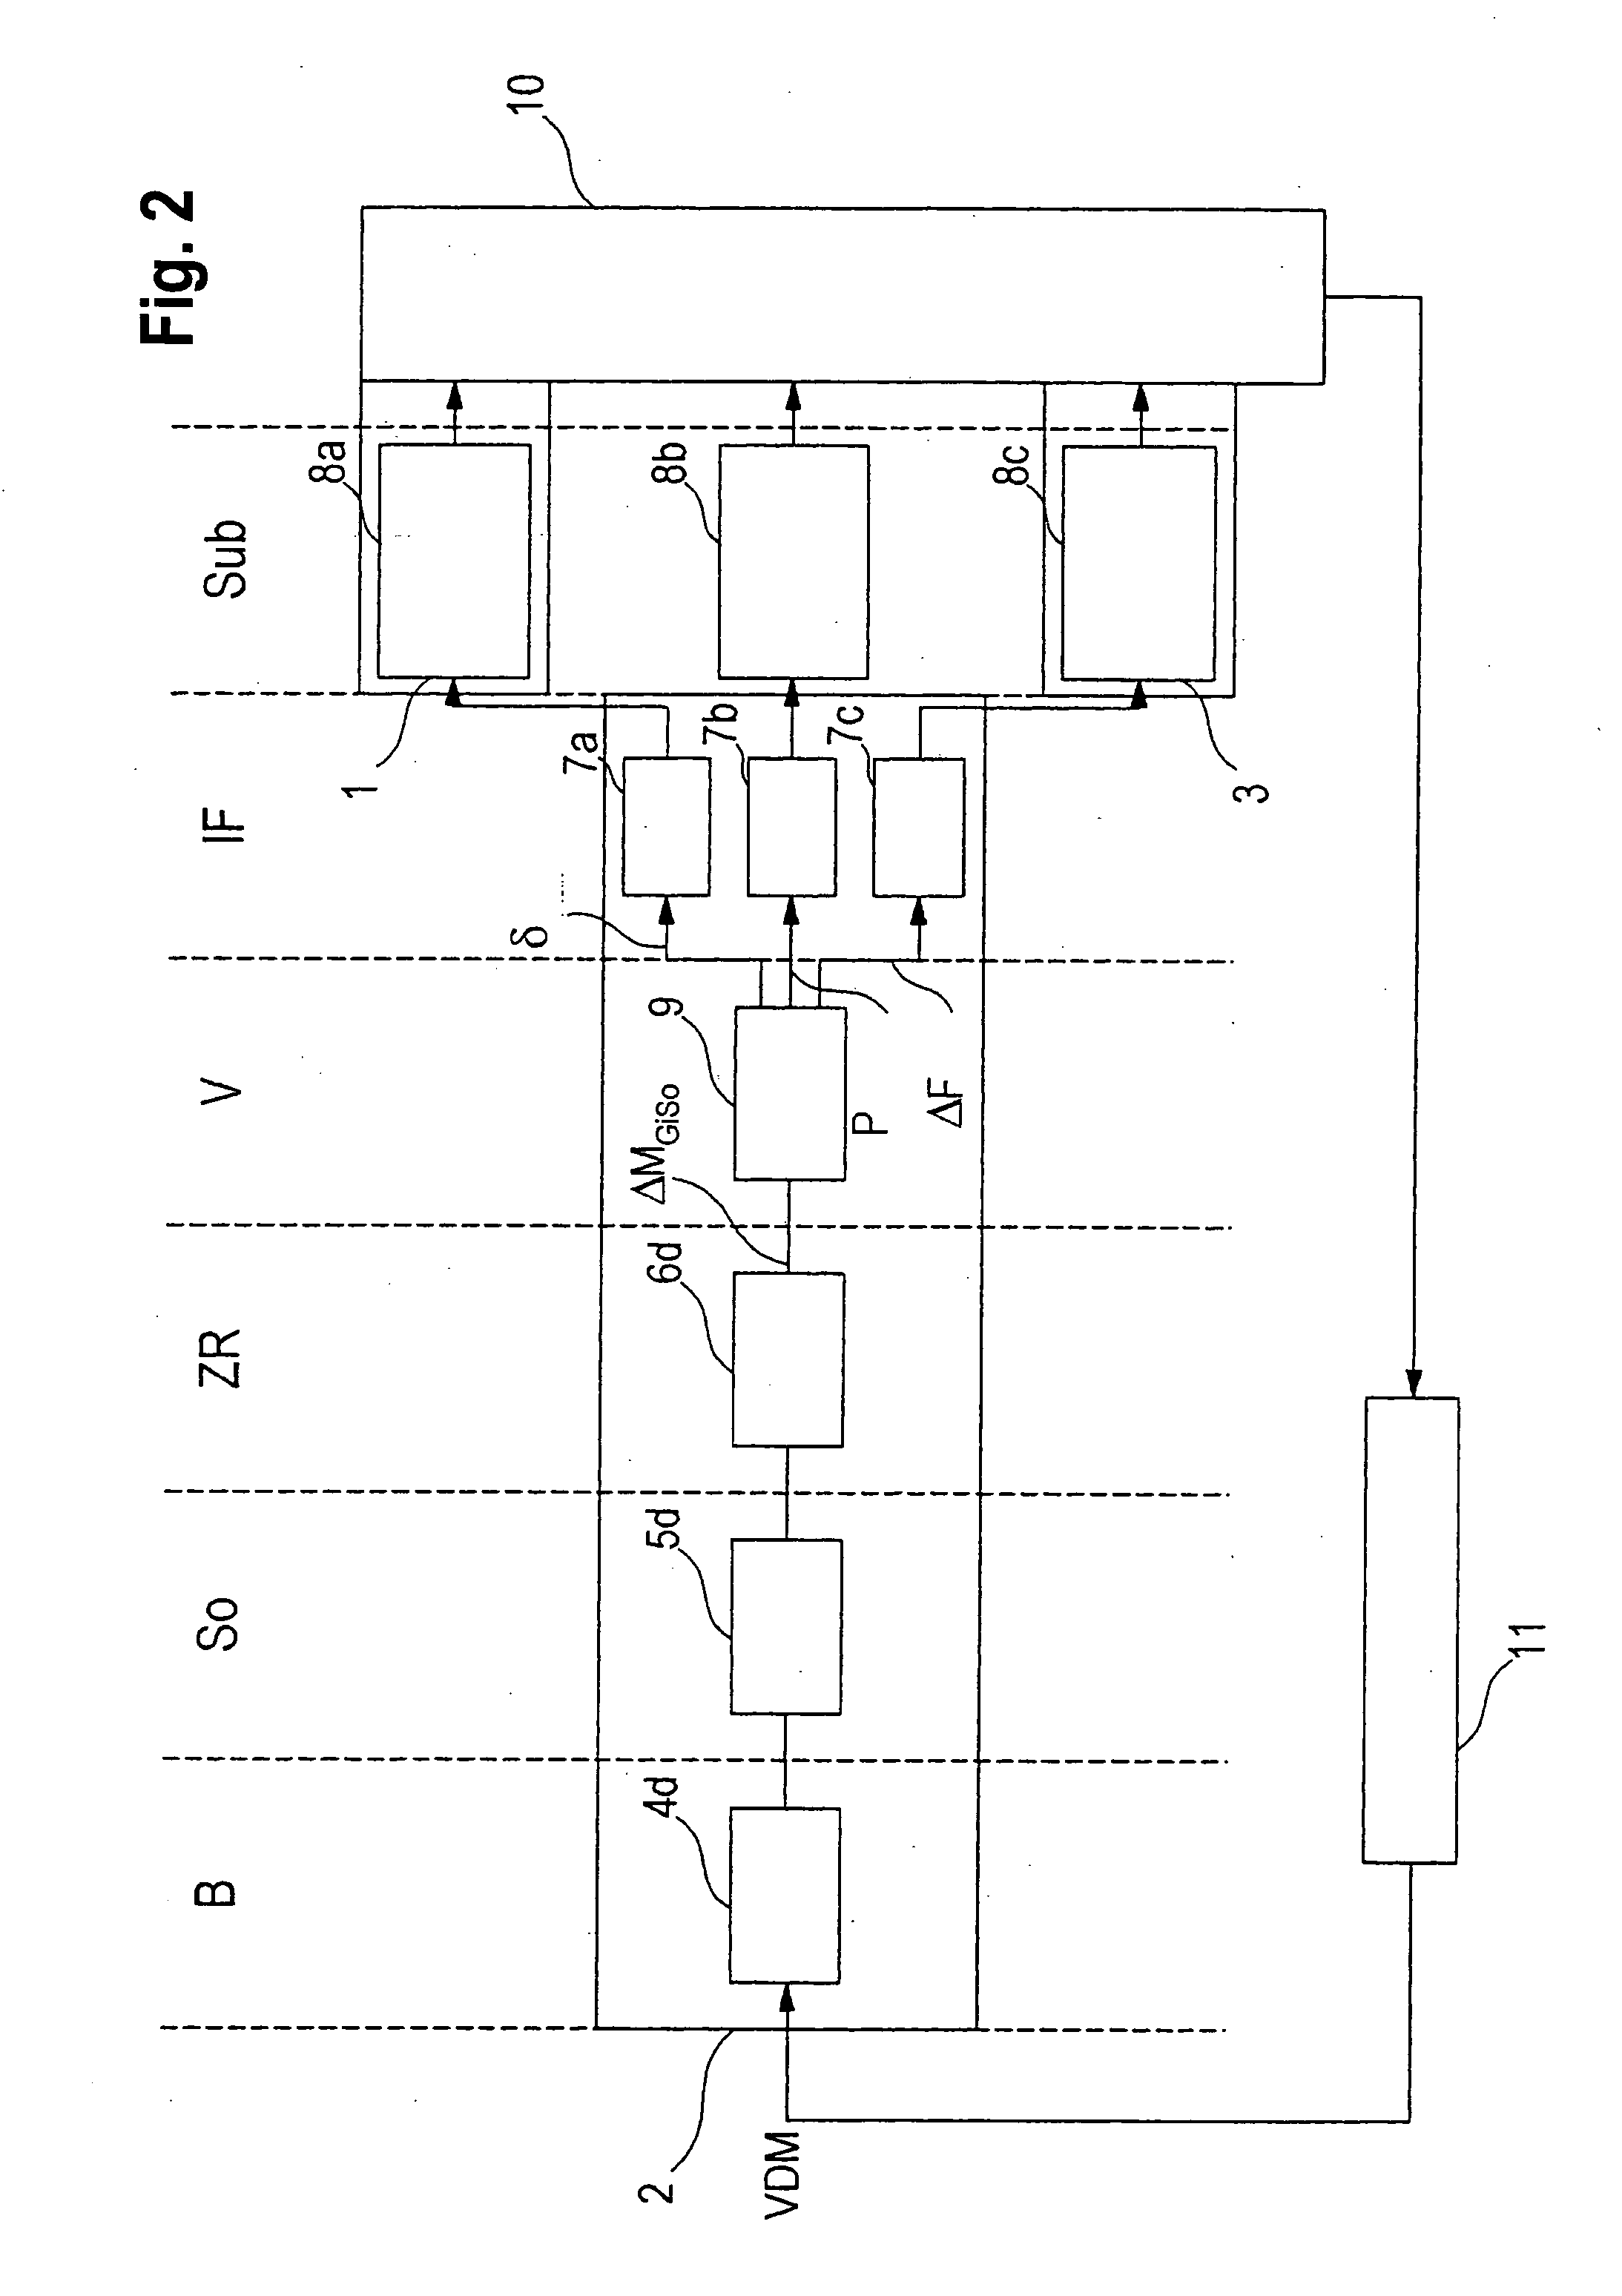 Coordination of a vehicle dynamics control system with other vehicles stability systems